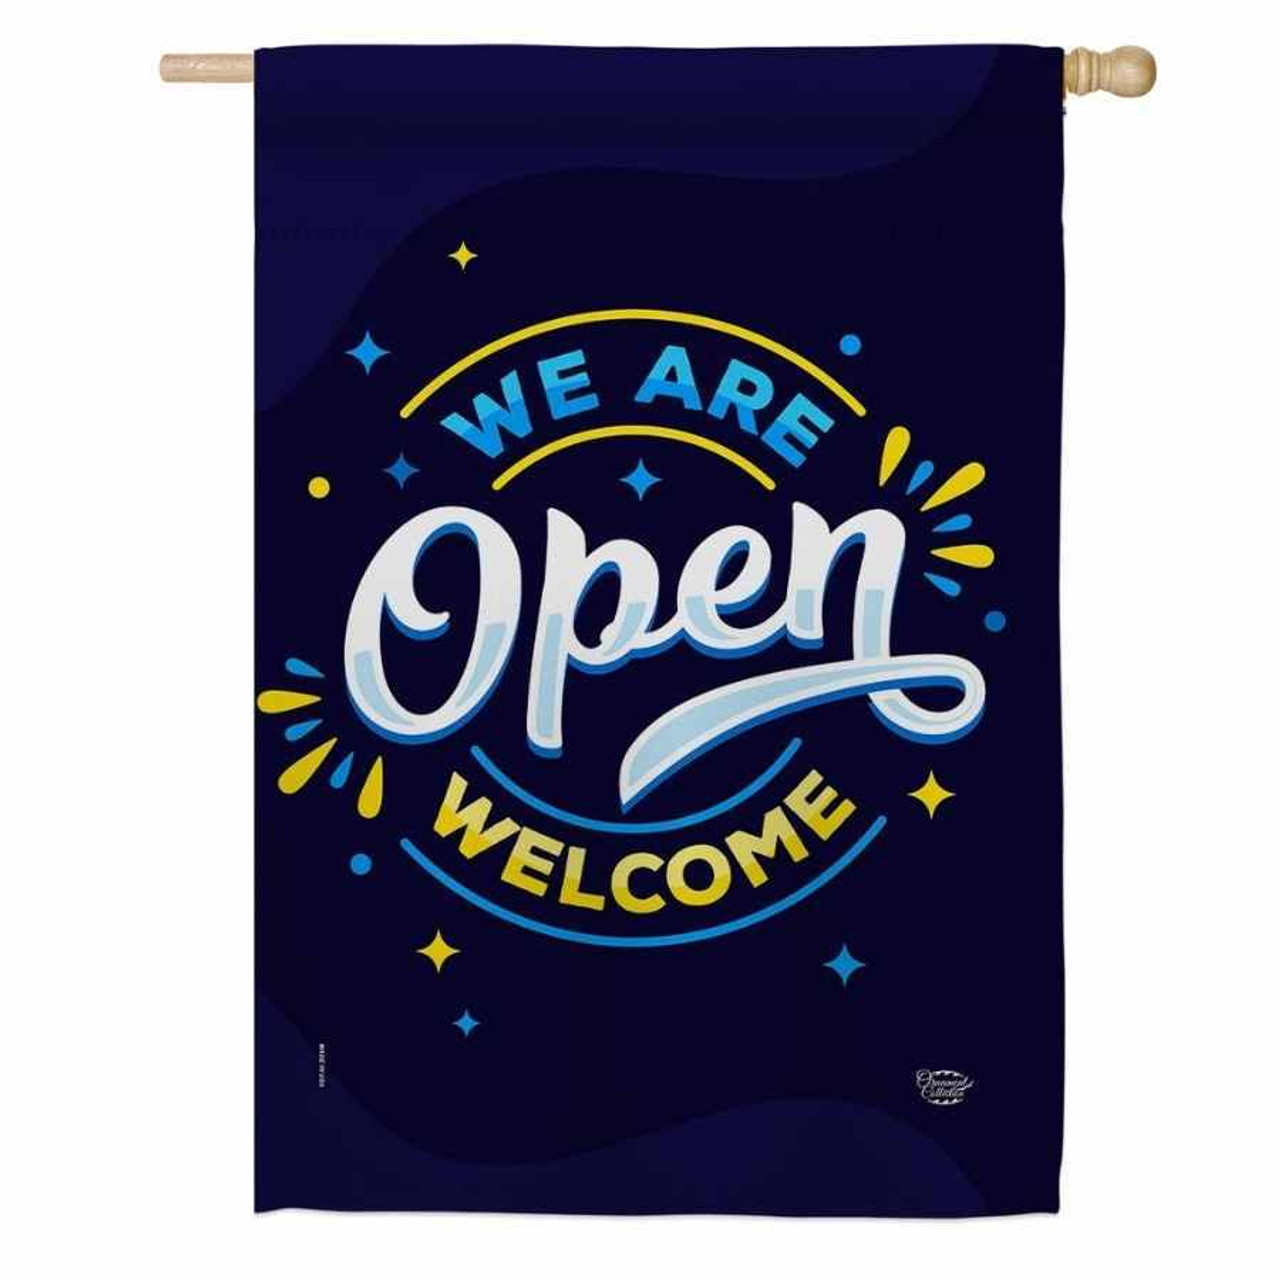 A dark blue flag that says "We are" in light blue, "Open" in white, and "Welcome" in yellow.